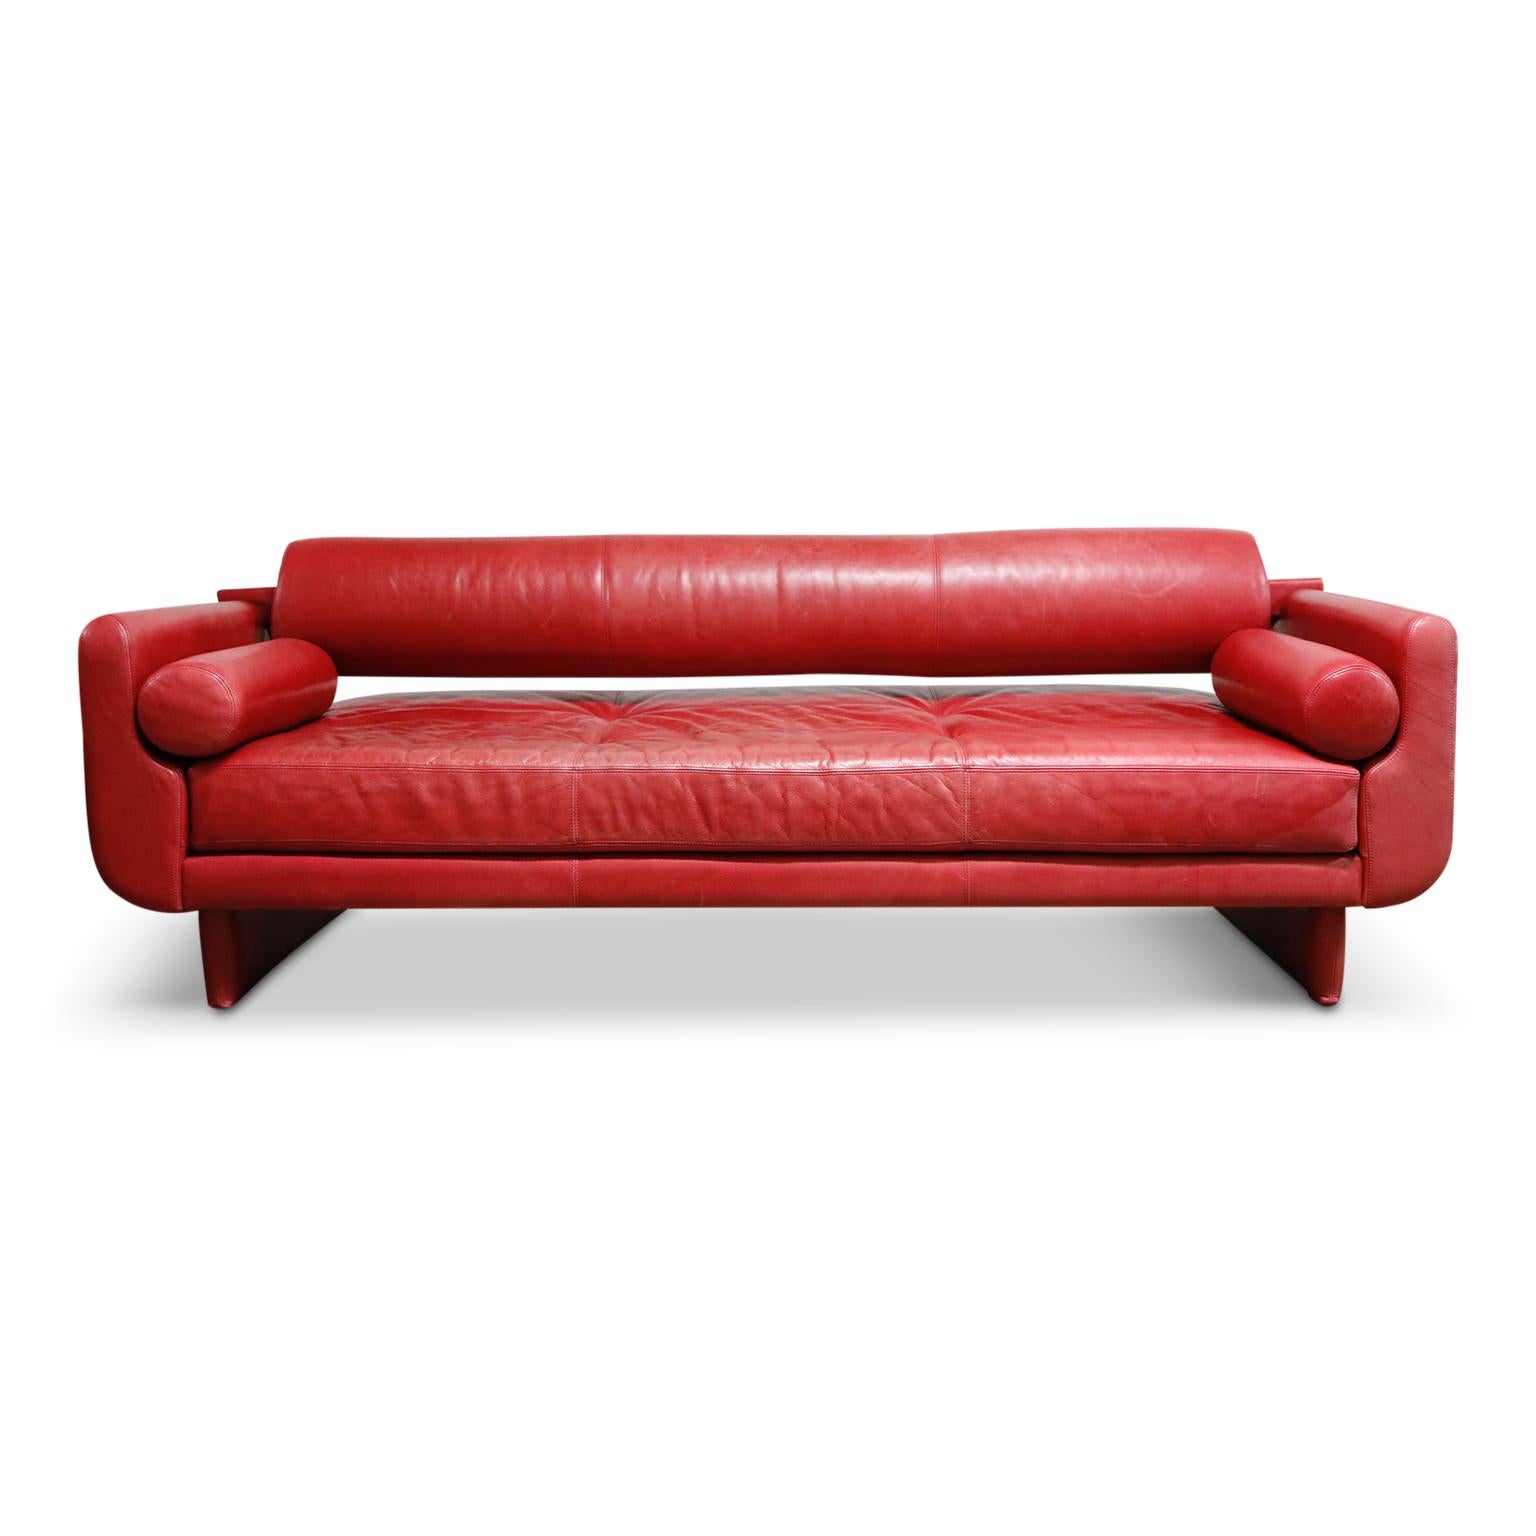 The red leather on this Vladimir Kagan for American leather Postmodern 'Matinee' convertible sofa daybed is absolutely to die for. Beautiful color and patina throughout, featuring high quality leather that Vladimir Kagan and American leather were